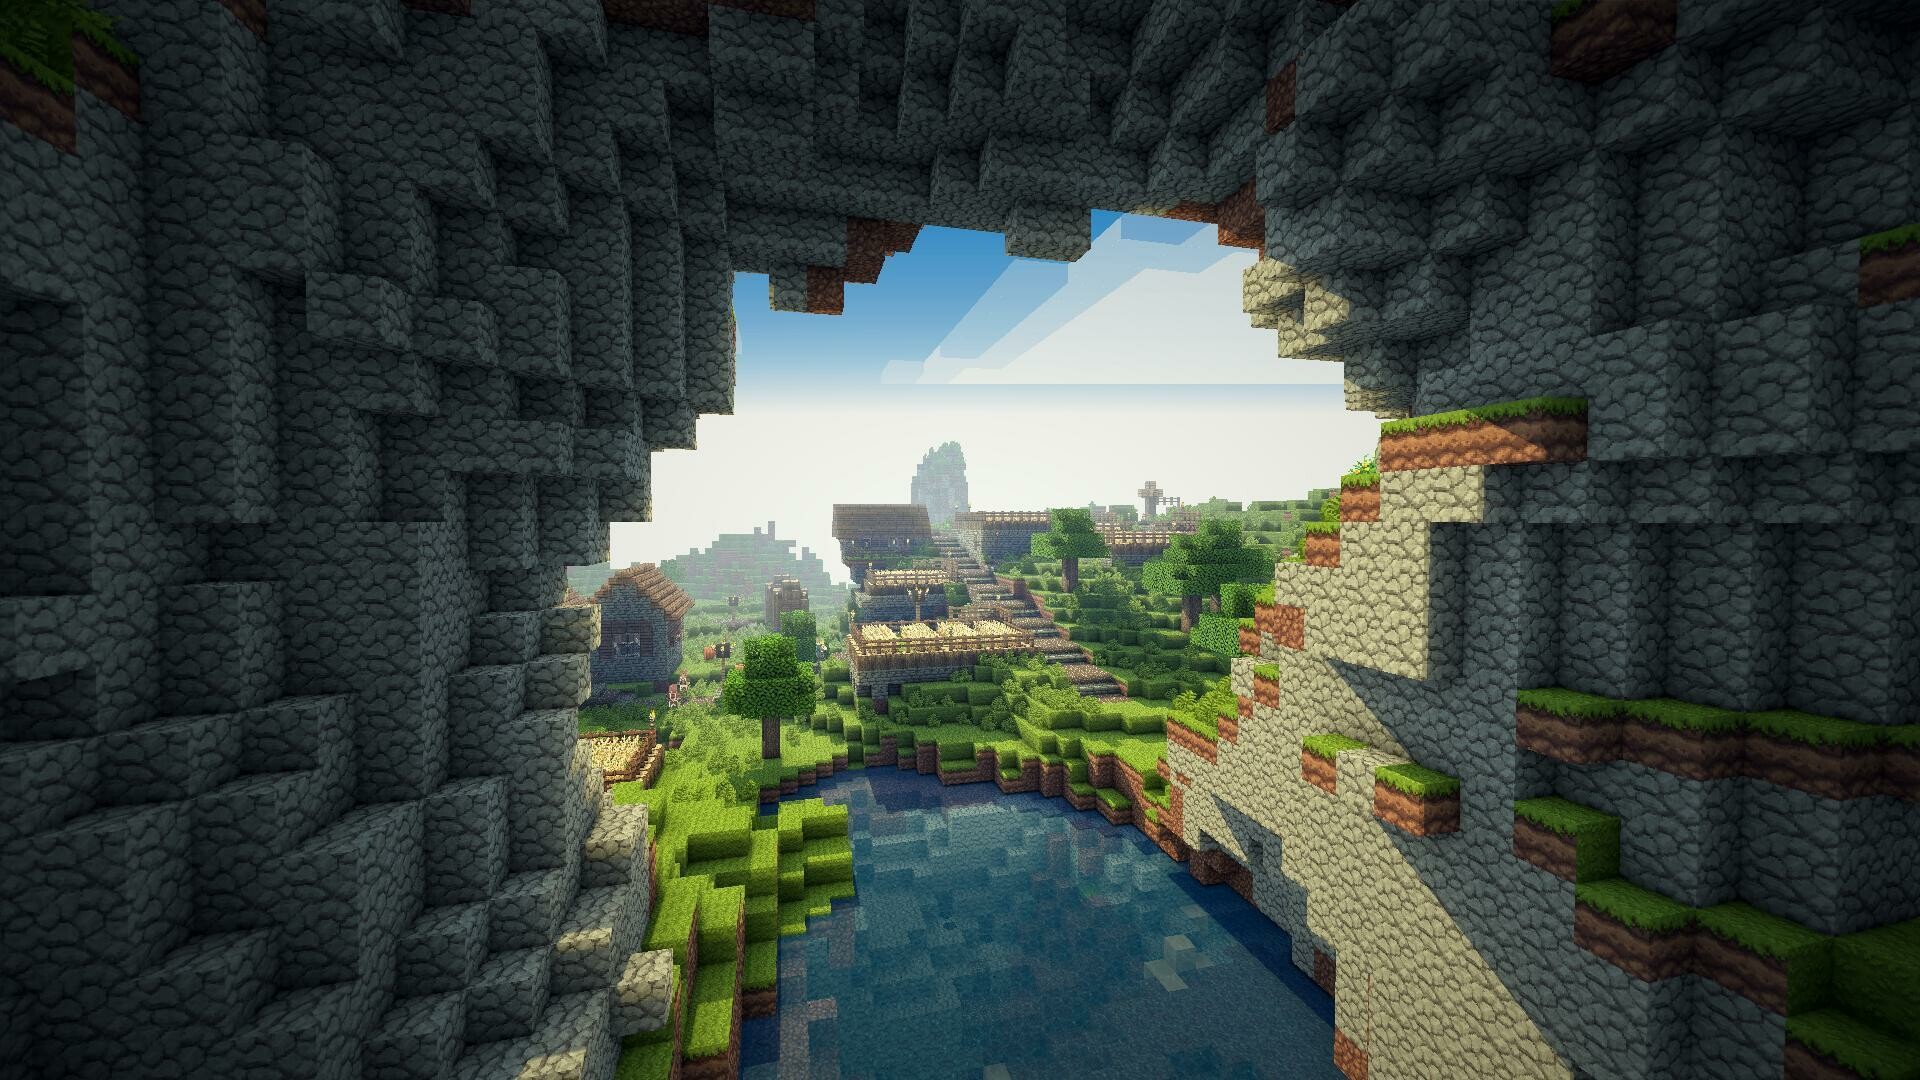 Minecraft: When starting a new world, players must choose one of five game modes, as well as one of four difficulties, ranging from "Peaceful" to "Hard". 1920x1080 Full HD Background.